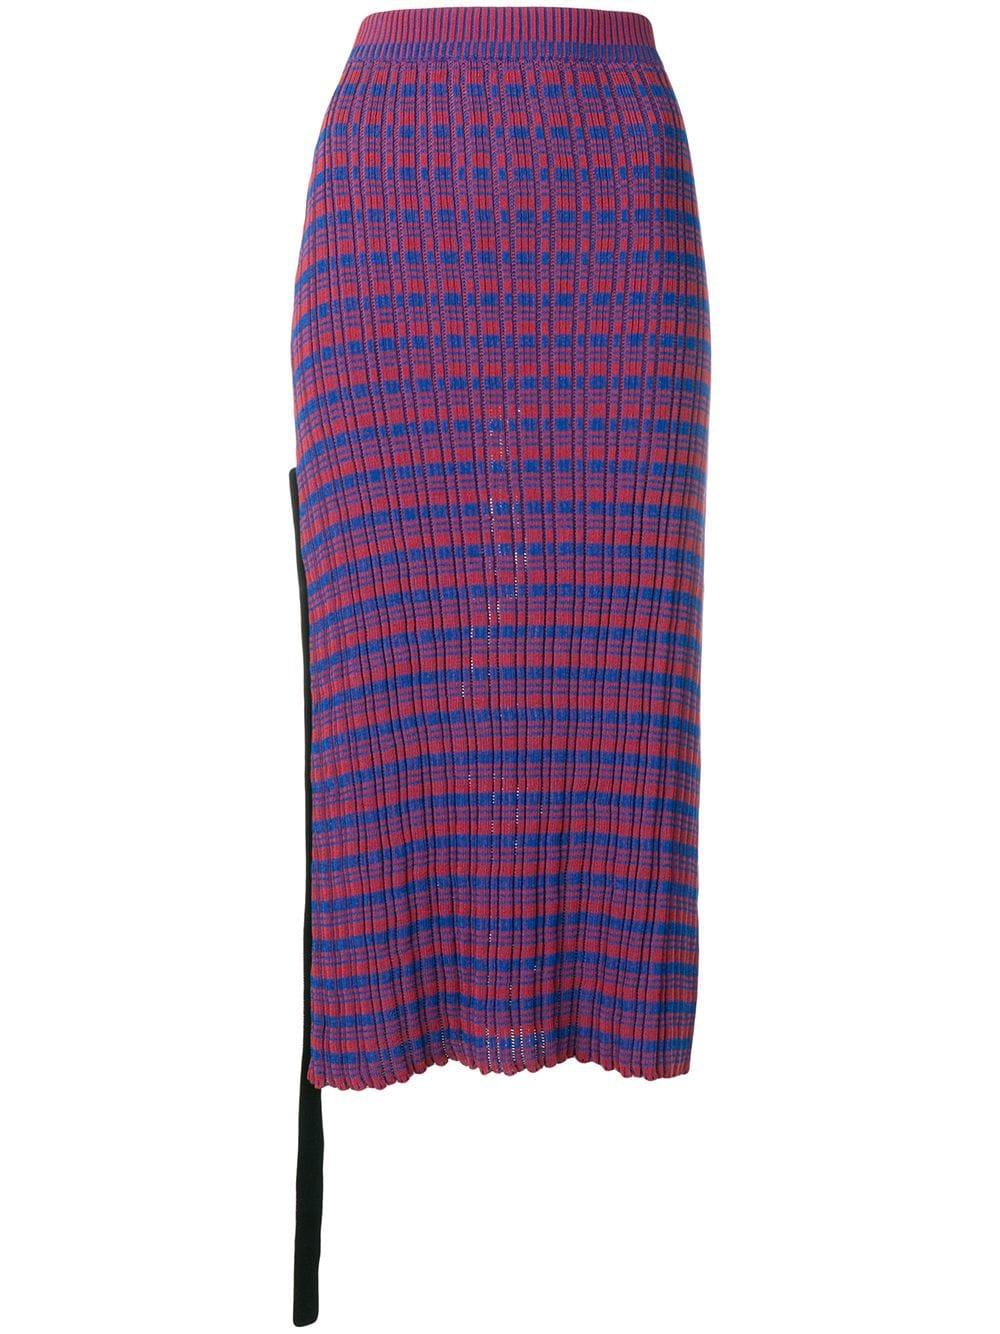 Jil Sander Cotton Check Knitted Midi Skirt in Red - Lyst